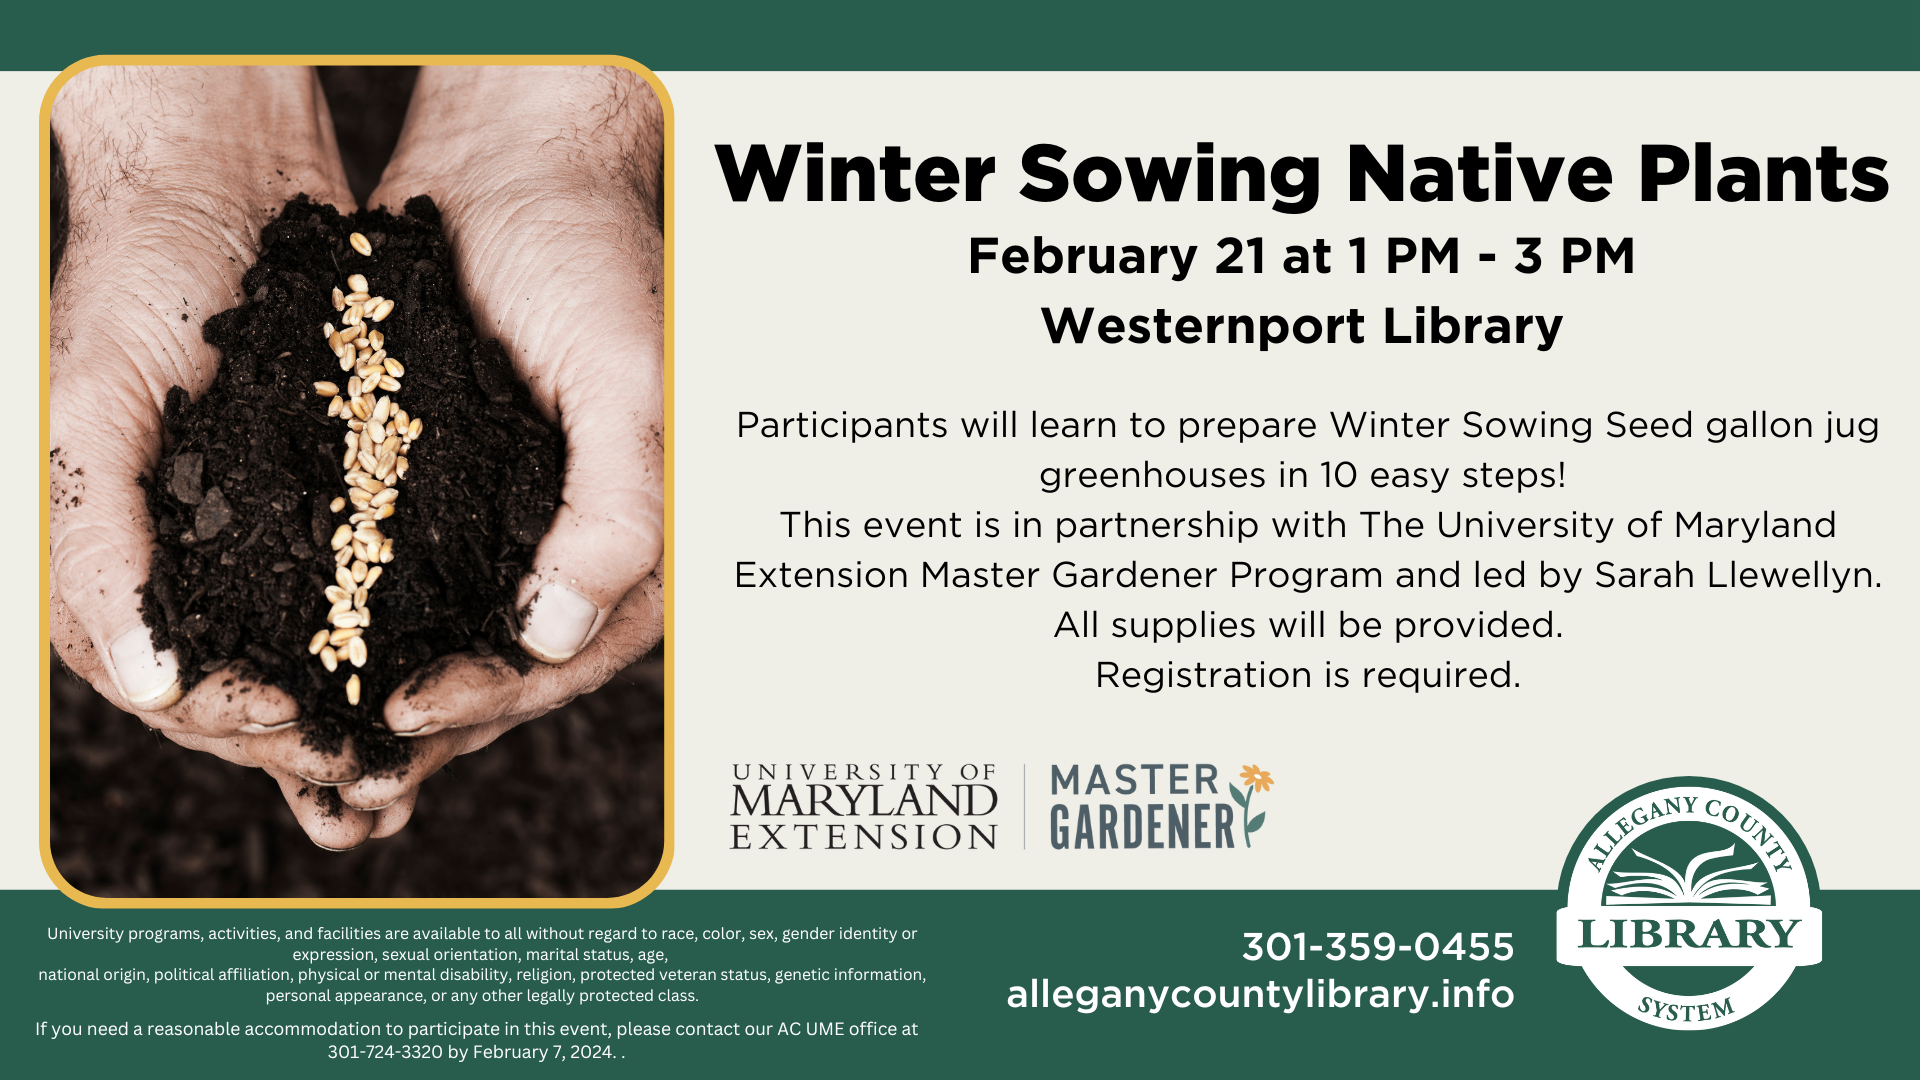 Winter Sowing Plants event details with a picture of someone holding dirt with seeds sprinkled in